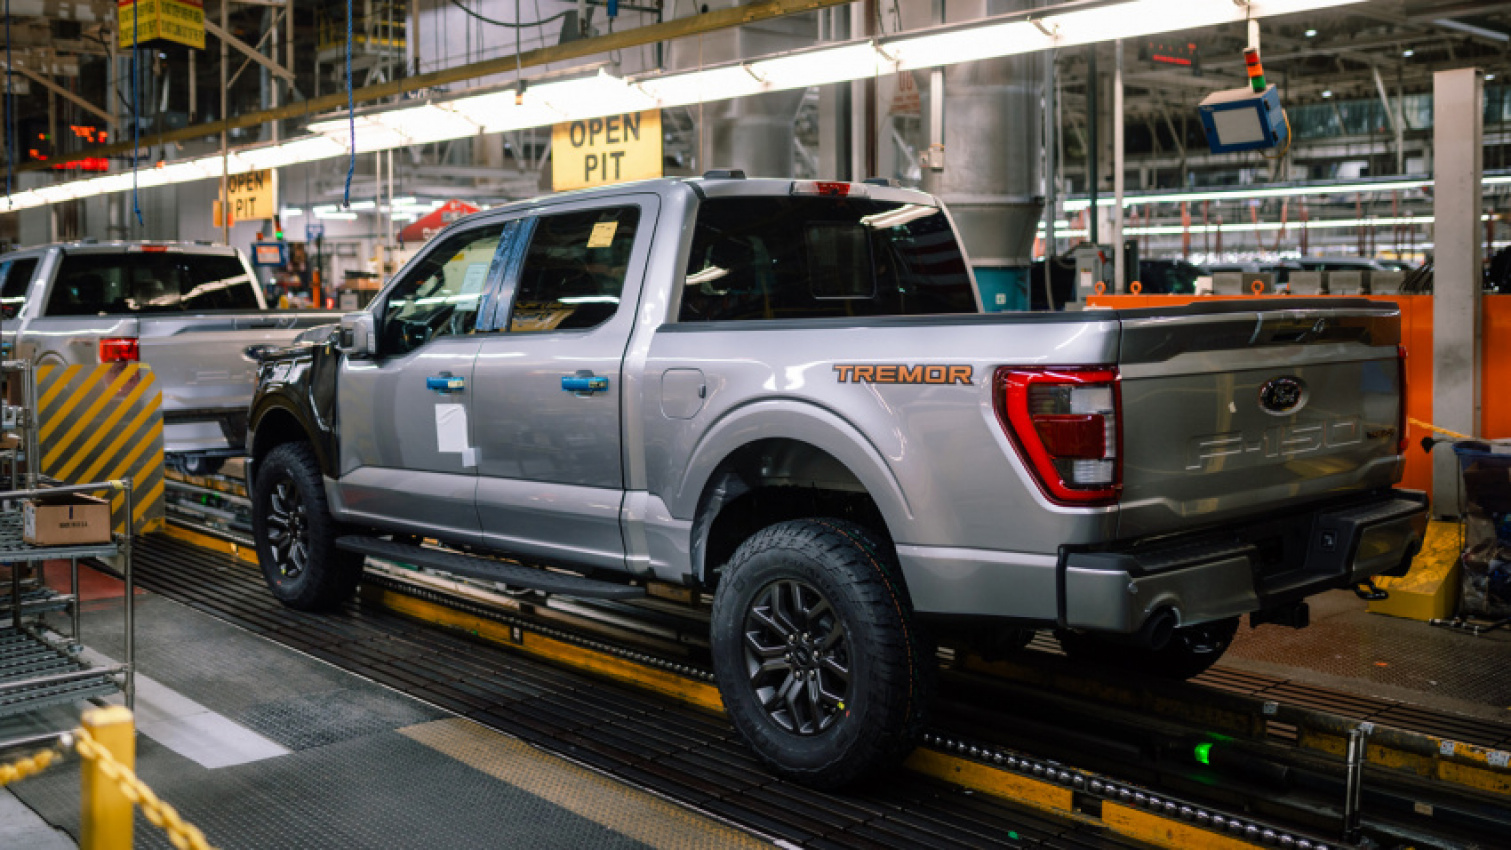 auto news, autos, cars, ford, f-150, ford f-series, pick up truck, ford f-series: 40 million units built, and counting